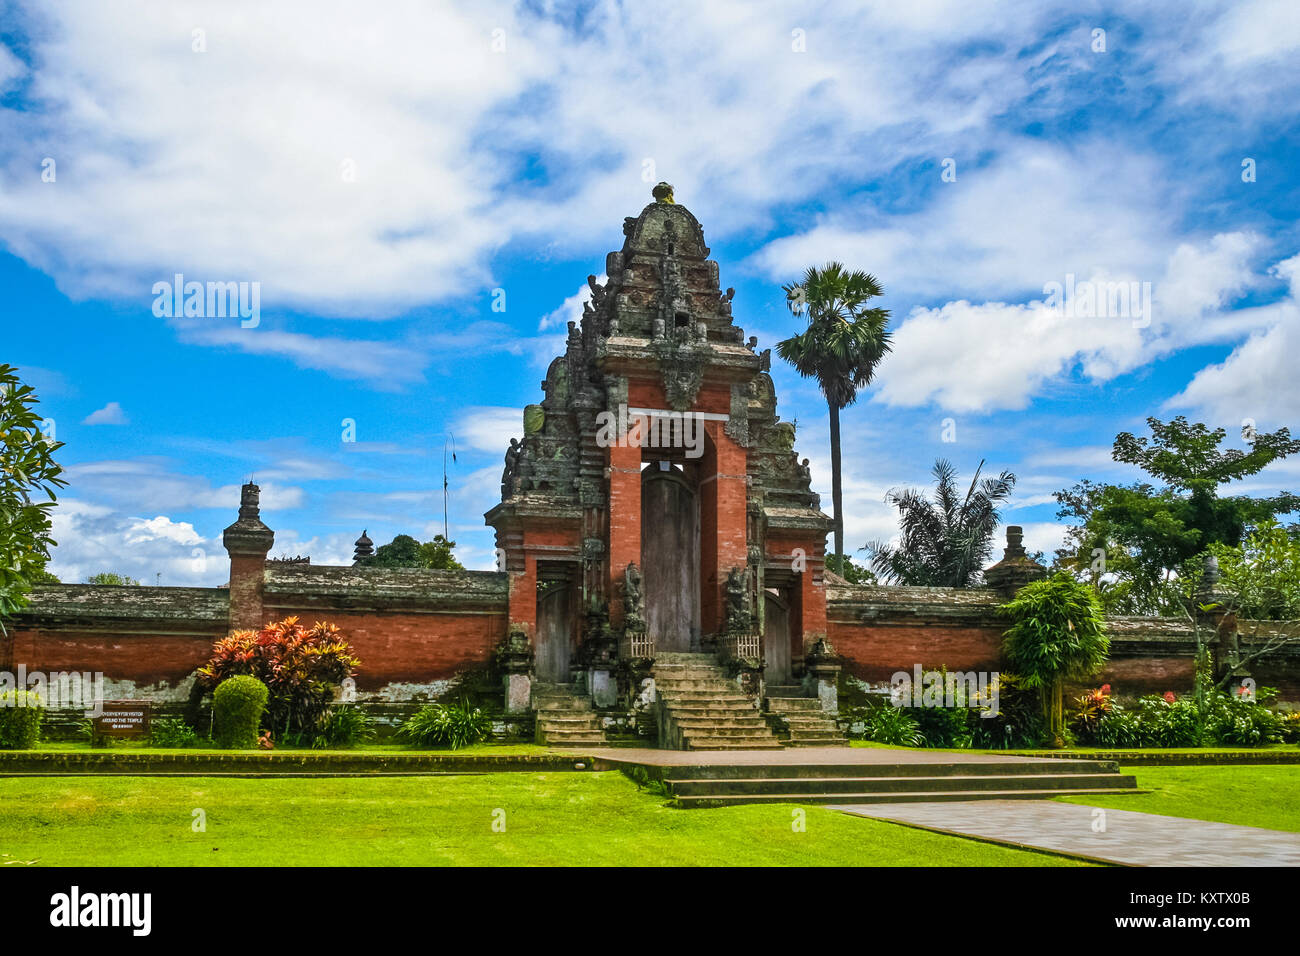 A roofed tower gate (kori agung), which is the entrance to the temple's inner sanctum of Pura Taman Ayun in Mengwi, Bali, Indonesia. Stock Photo